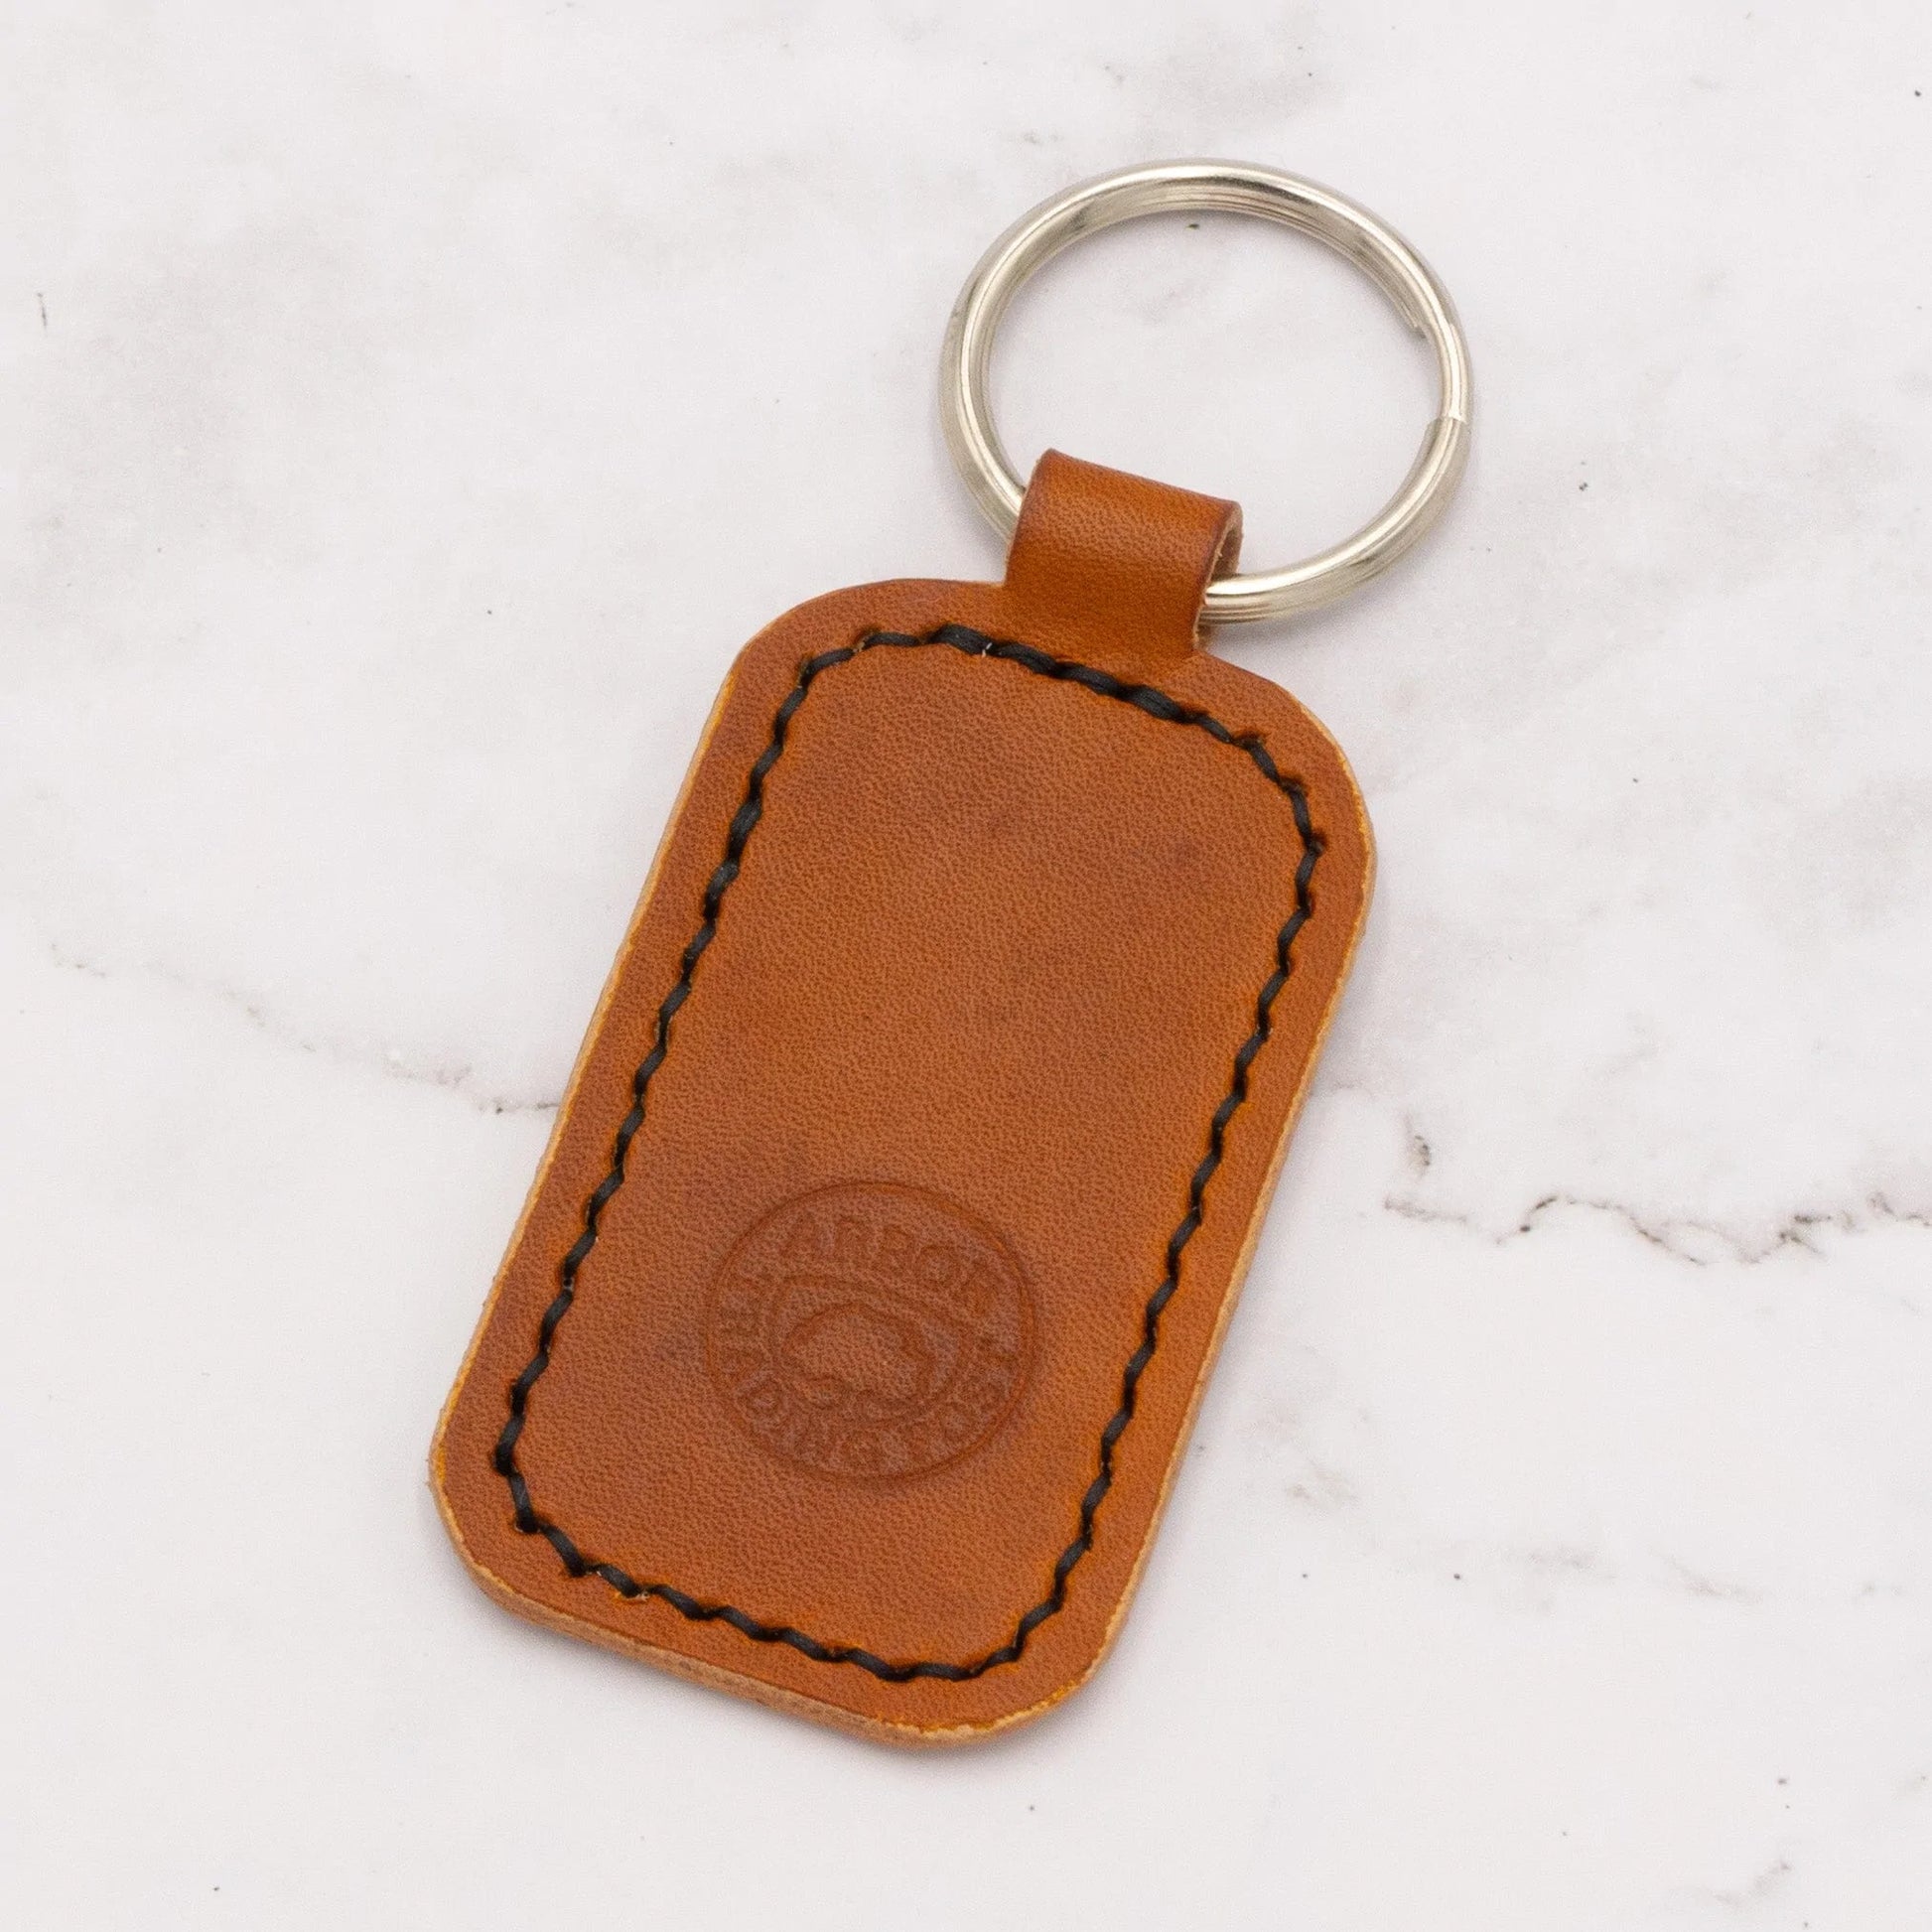 Arbor Trading Post Keychains Handmade Genuine Leather Key Chain #1 (Choose from 6 colors)